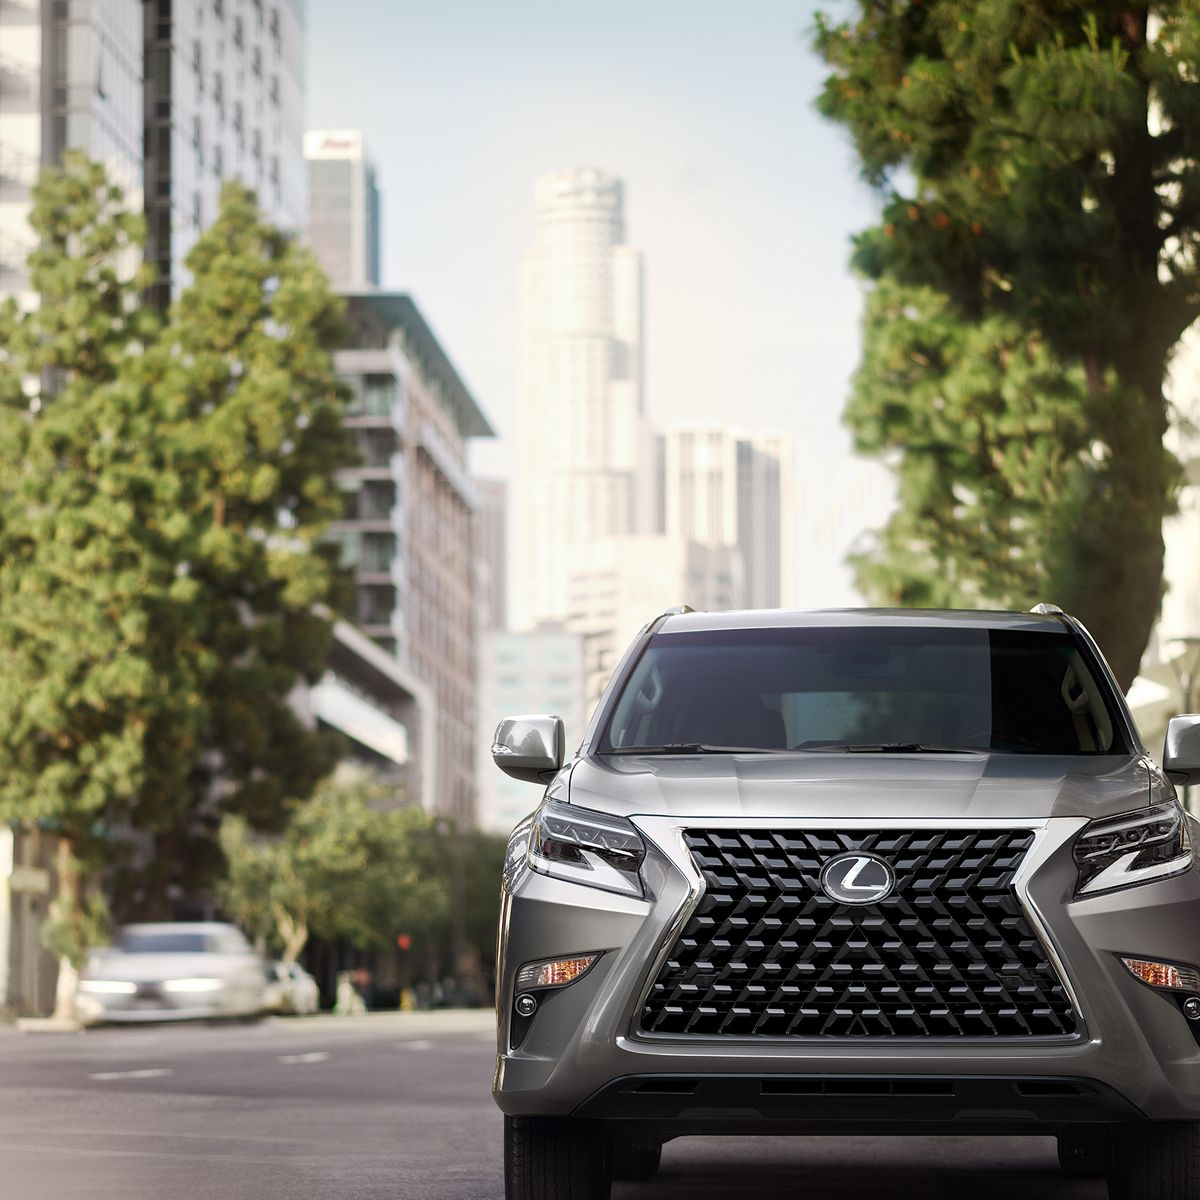 LEXUS LX 570 STRENGTHENS ITS POPULARITY IN THE UAE WITH A NEW